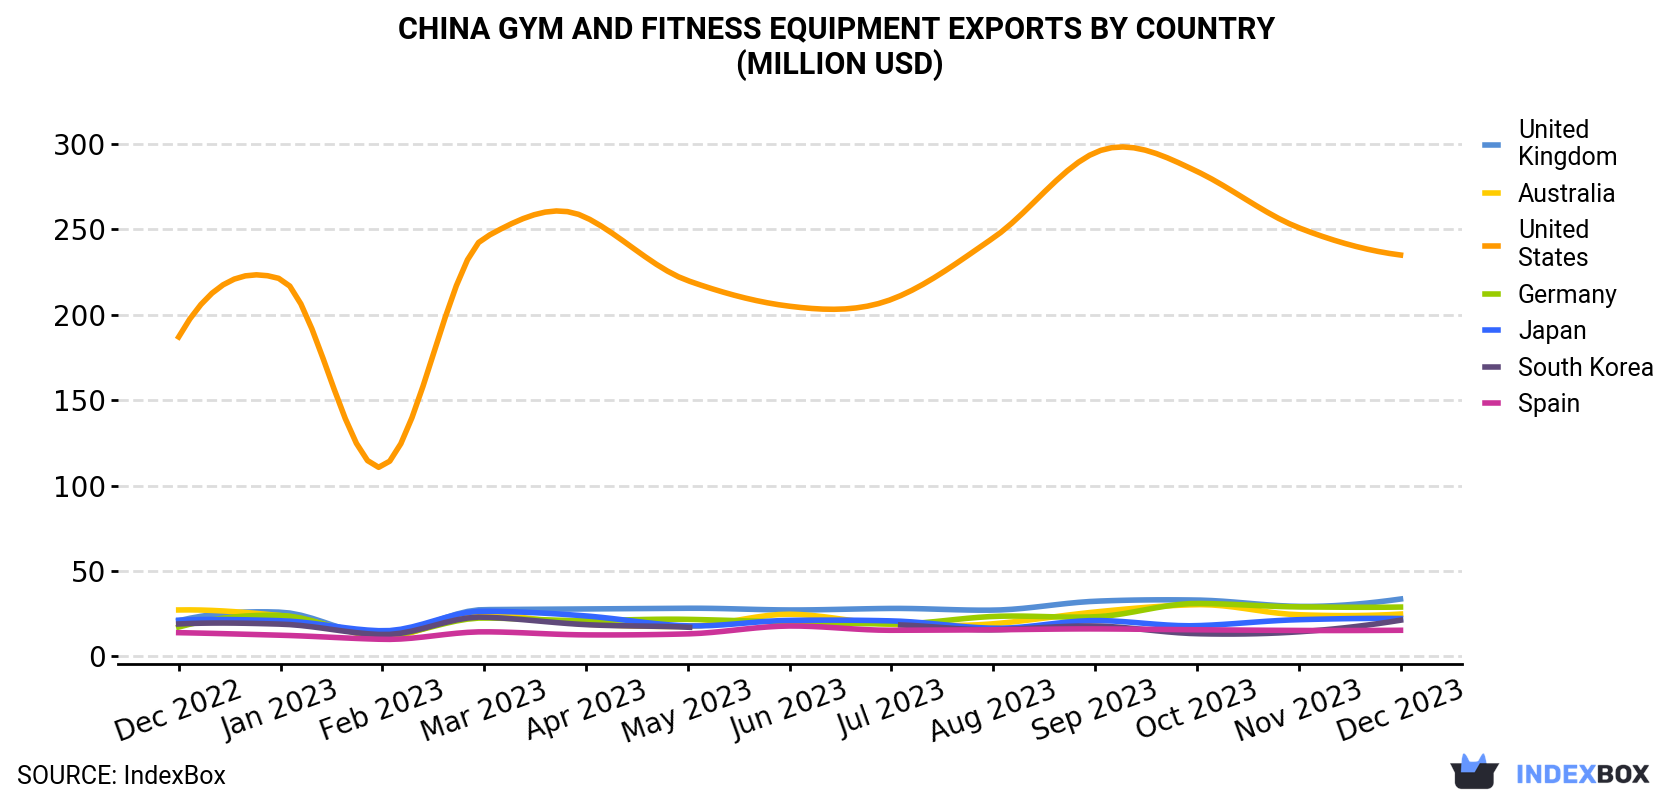 China Gym and Fitness Equipment Exports By Country (Million USD)